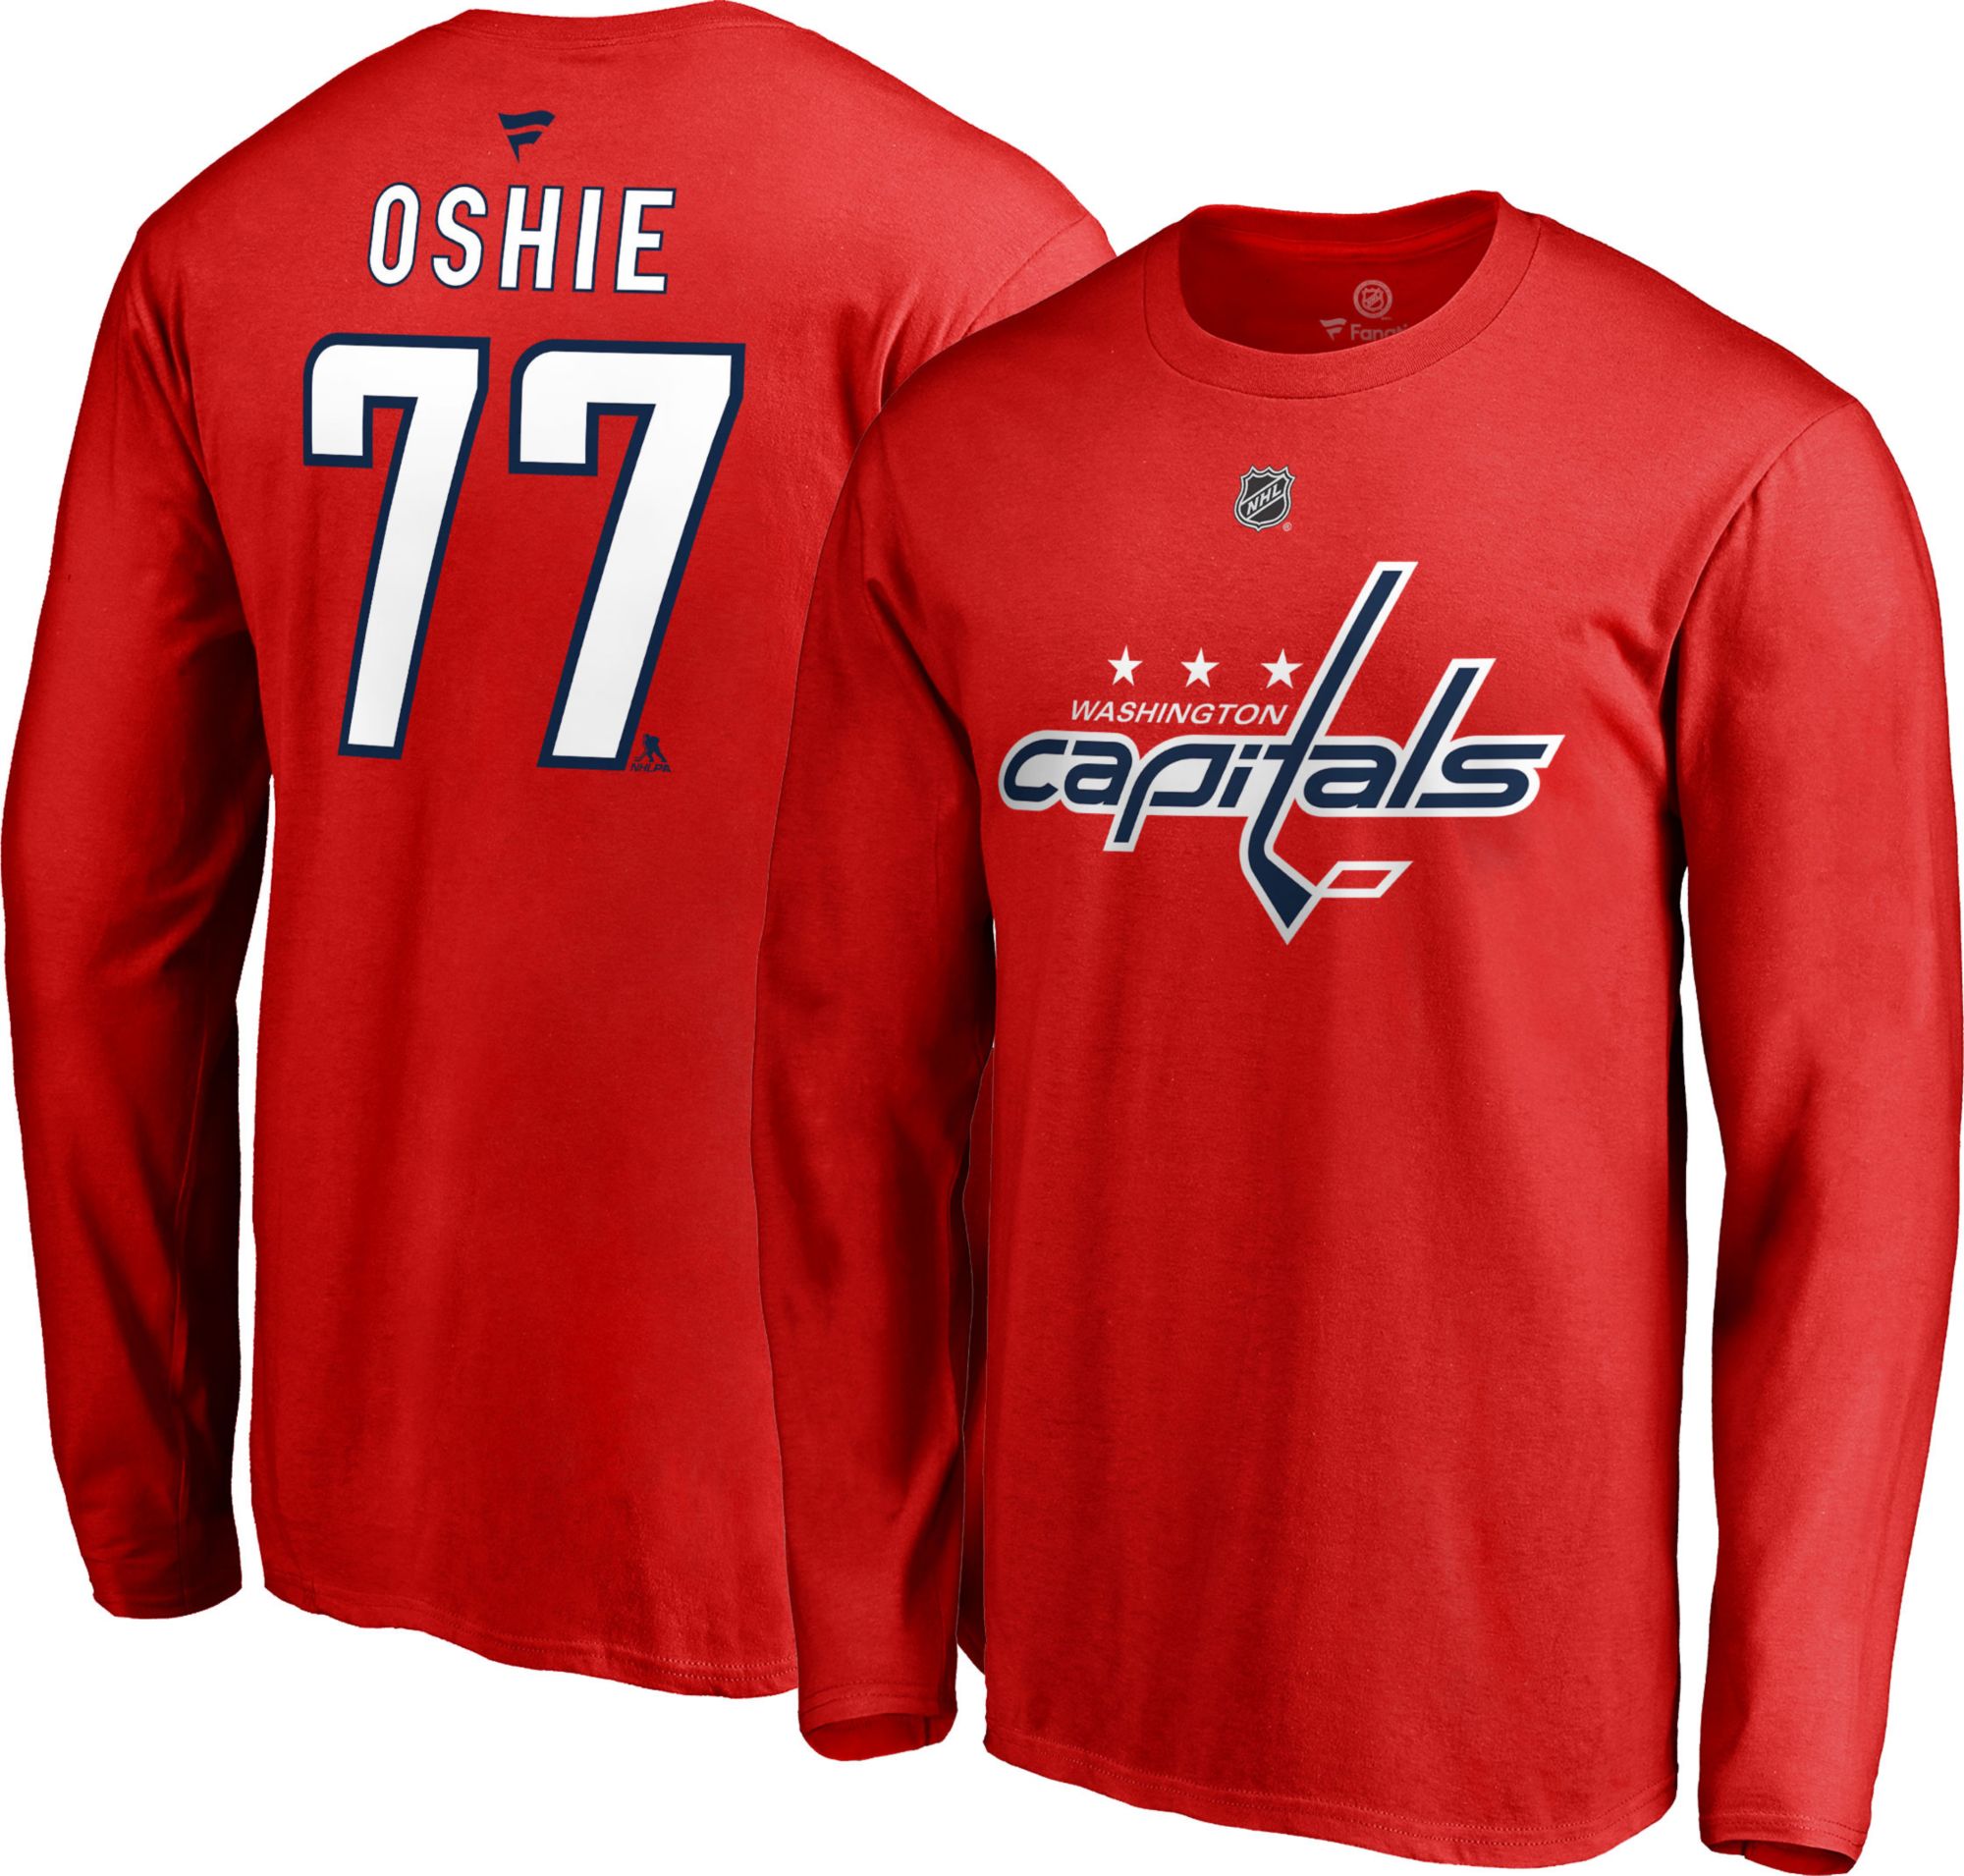 capitals oshie jersey